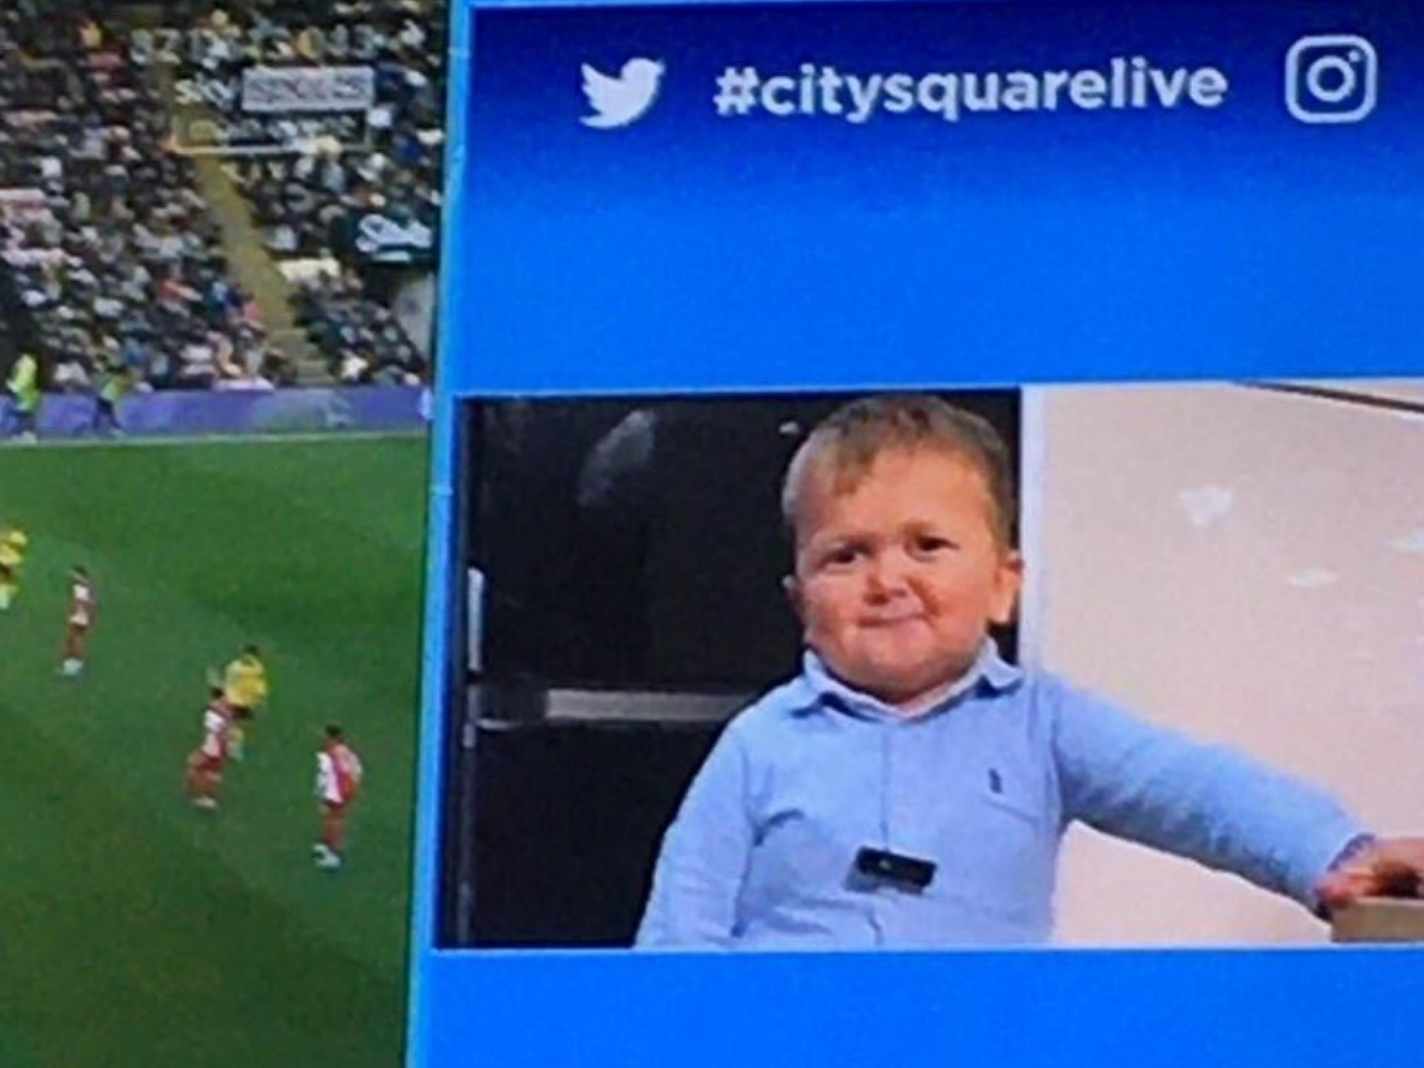 Man City fall for classic Hasbulla prank on Derby Day